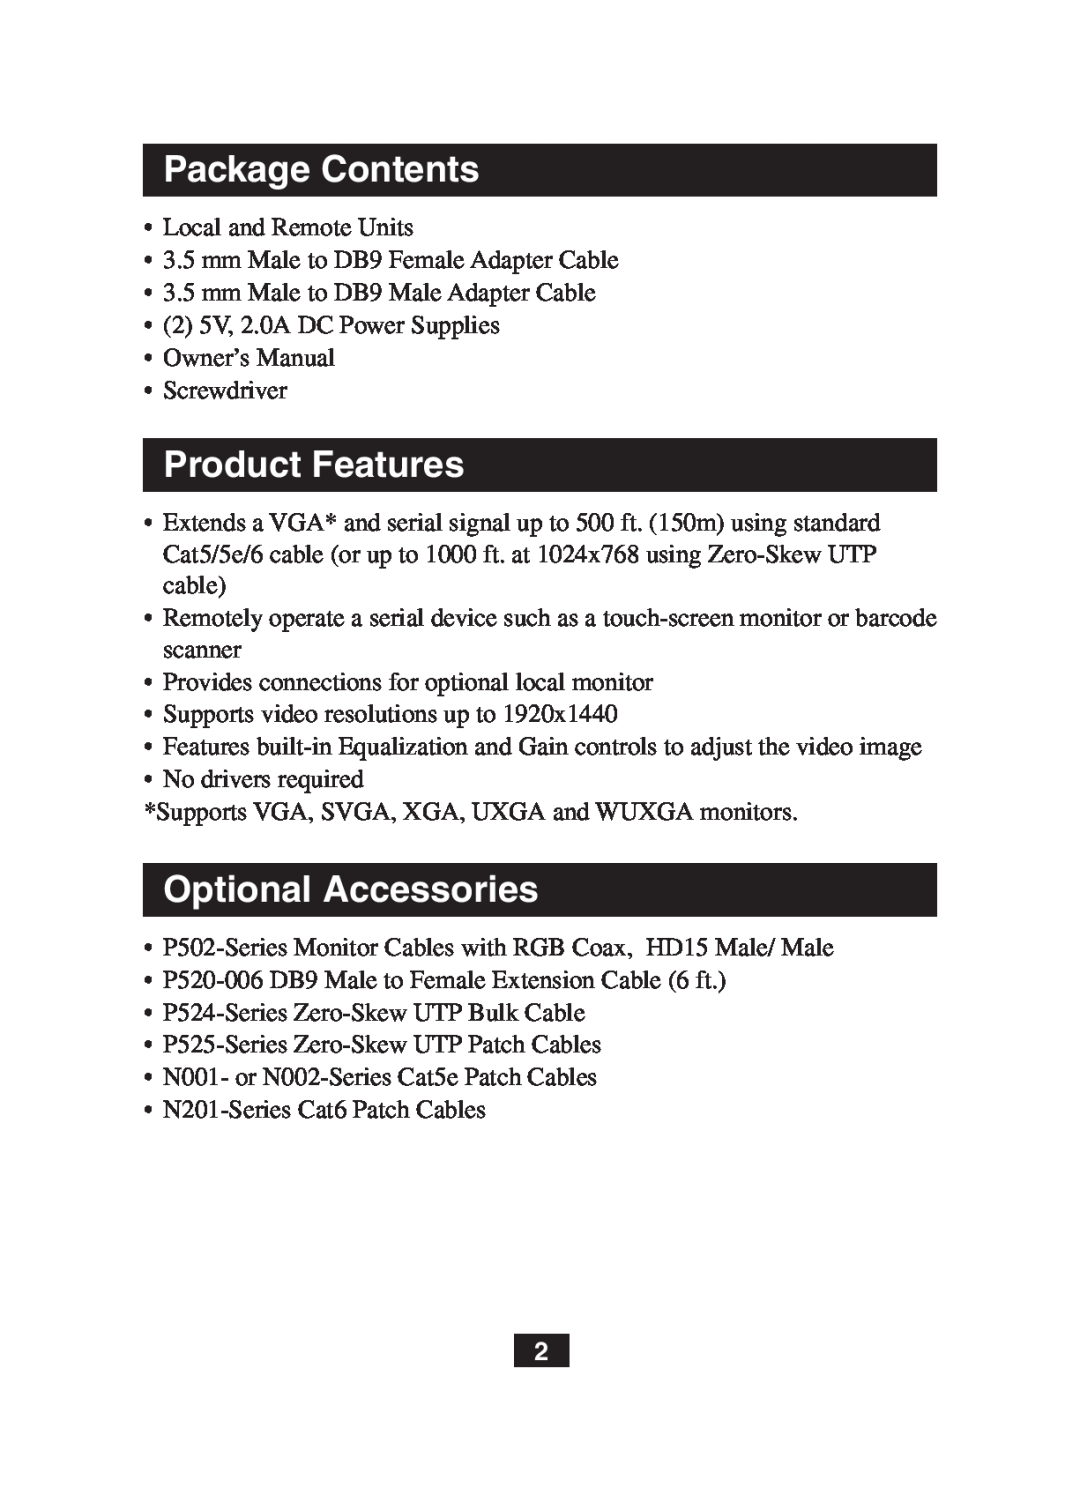 Tripp Lite B130-101S owner manual Package Contents, Product Features, Optional Accessories 